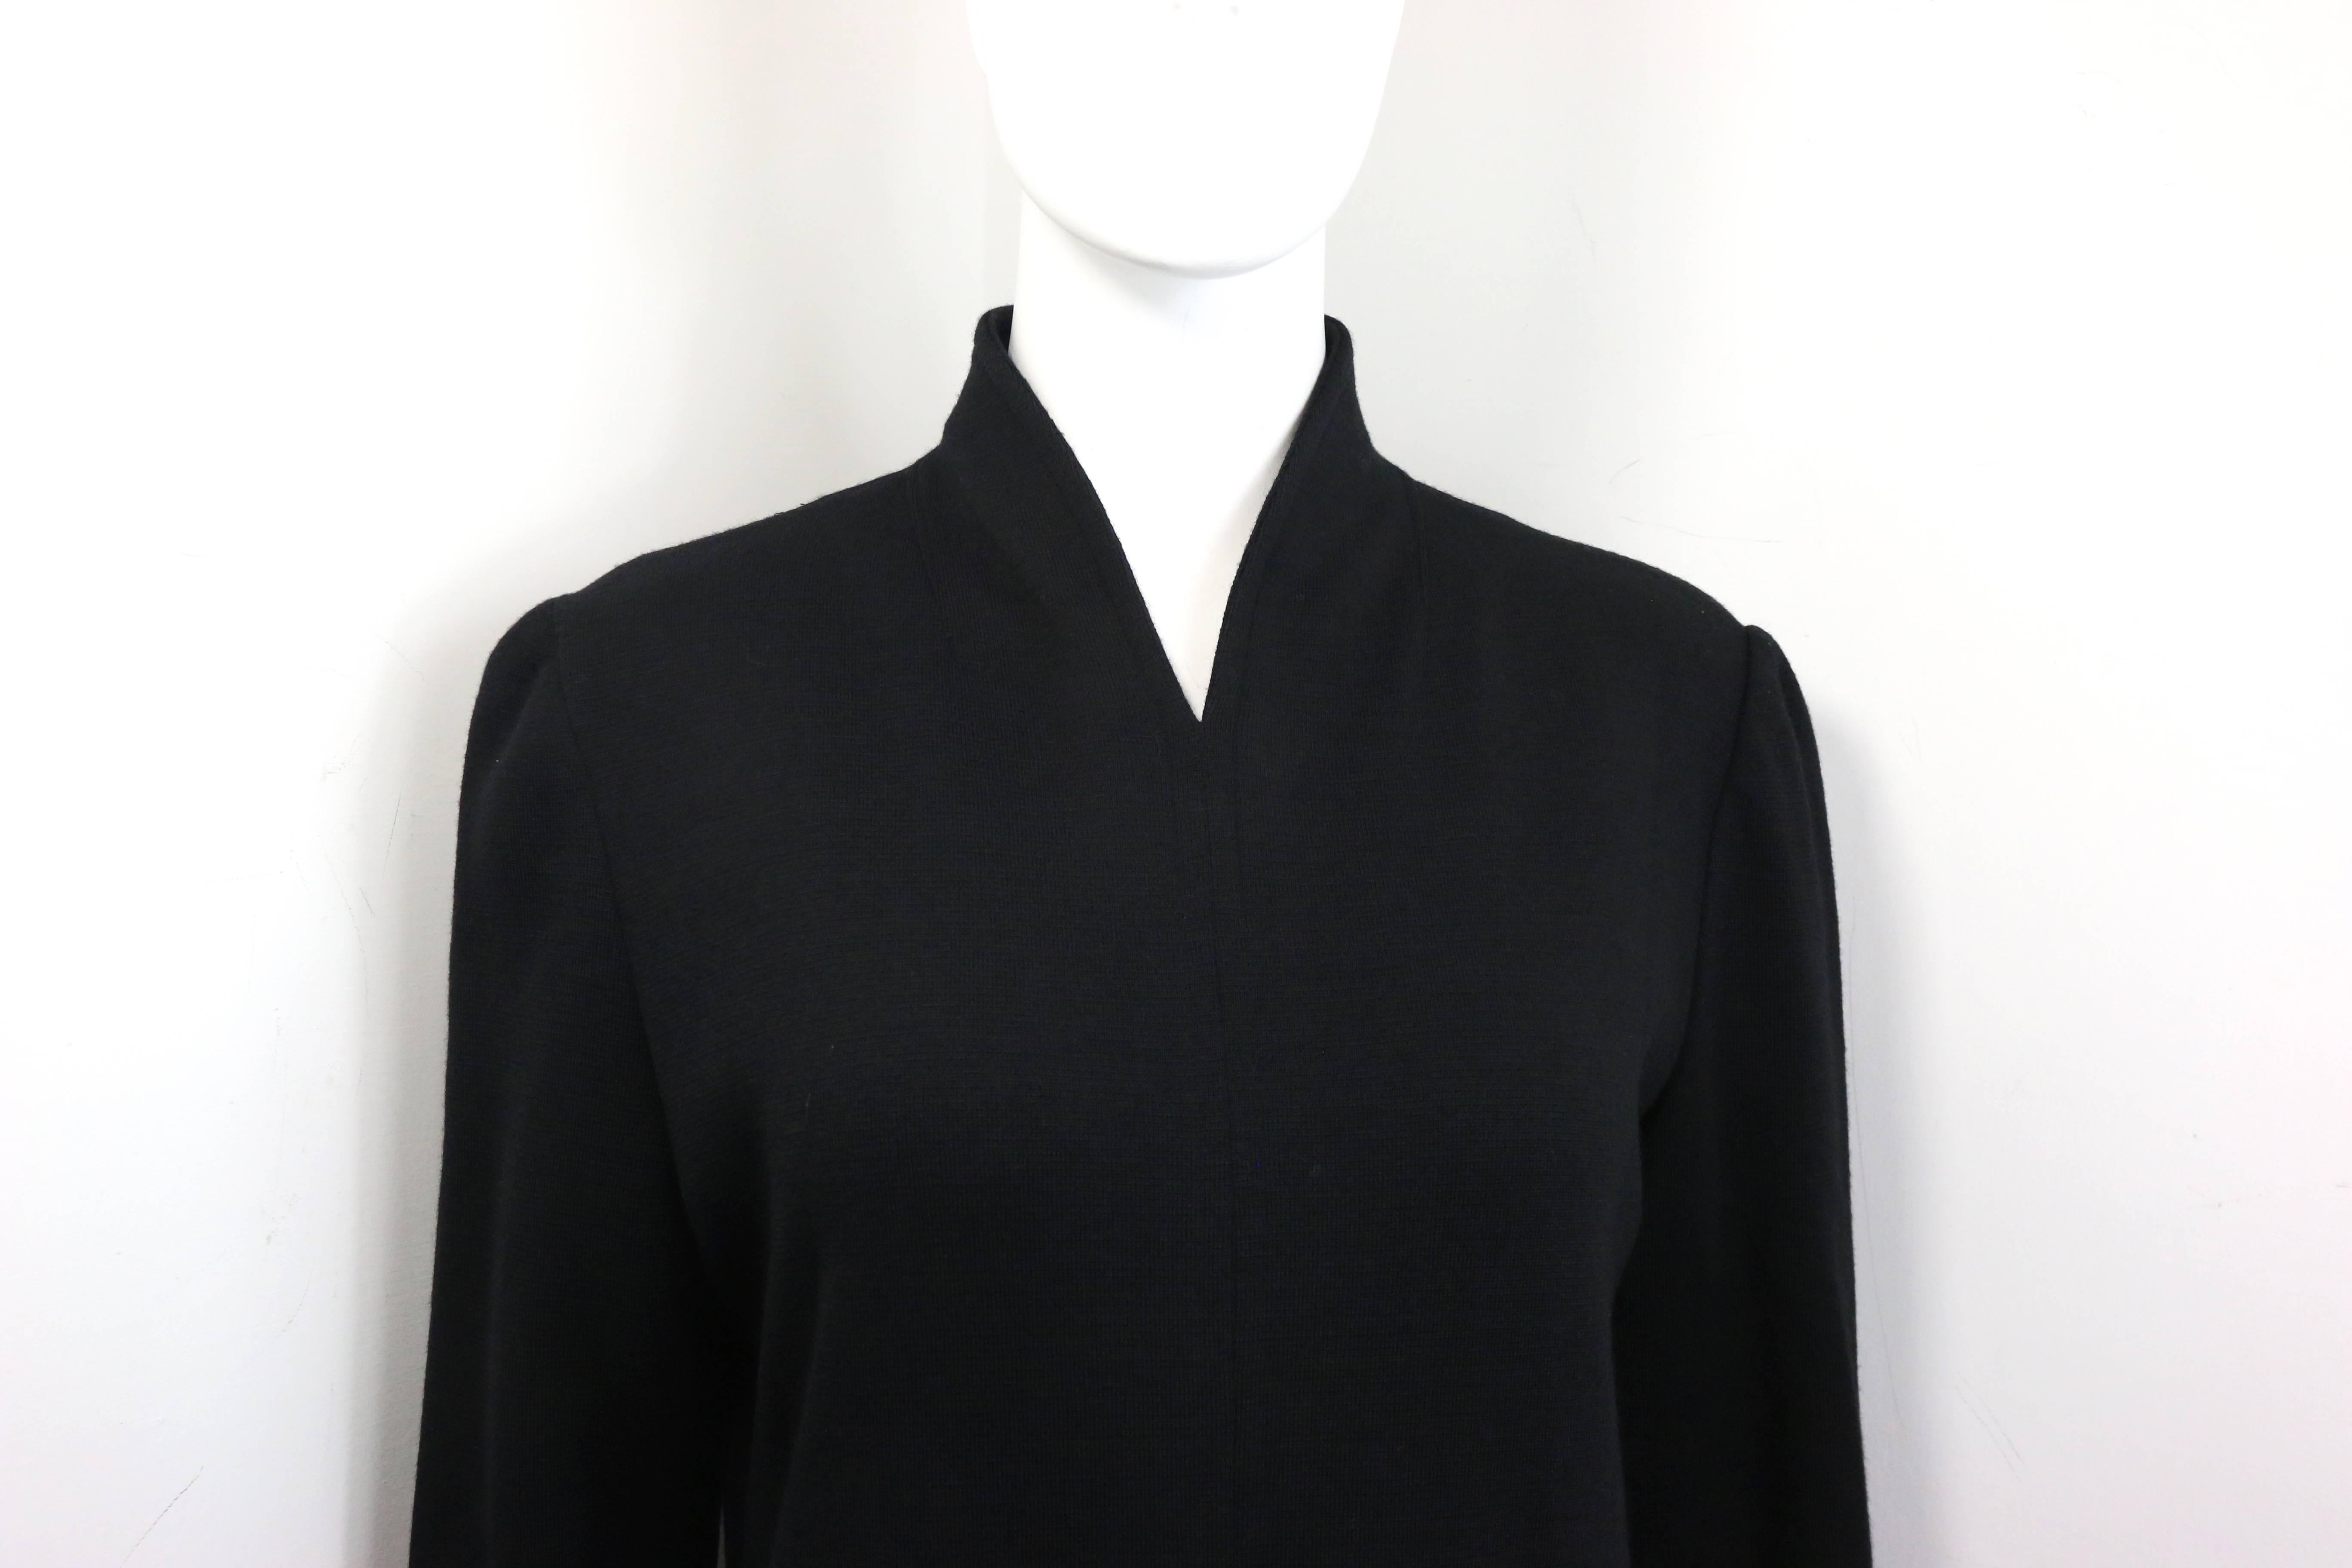 - Vintage 90s Celine black wool long dress. 

- V-Shaped Neckline. 

- Slit hem in front.

- Back zip closure. 

- Size 40. 

- Shoulder: 15 inches. Bust: 32 inches. Height: 51 inches. Sleeve: 24 inches. 

- 100% Pure wool. 

- 